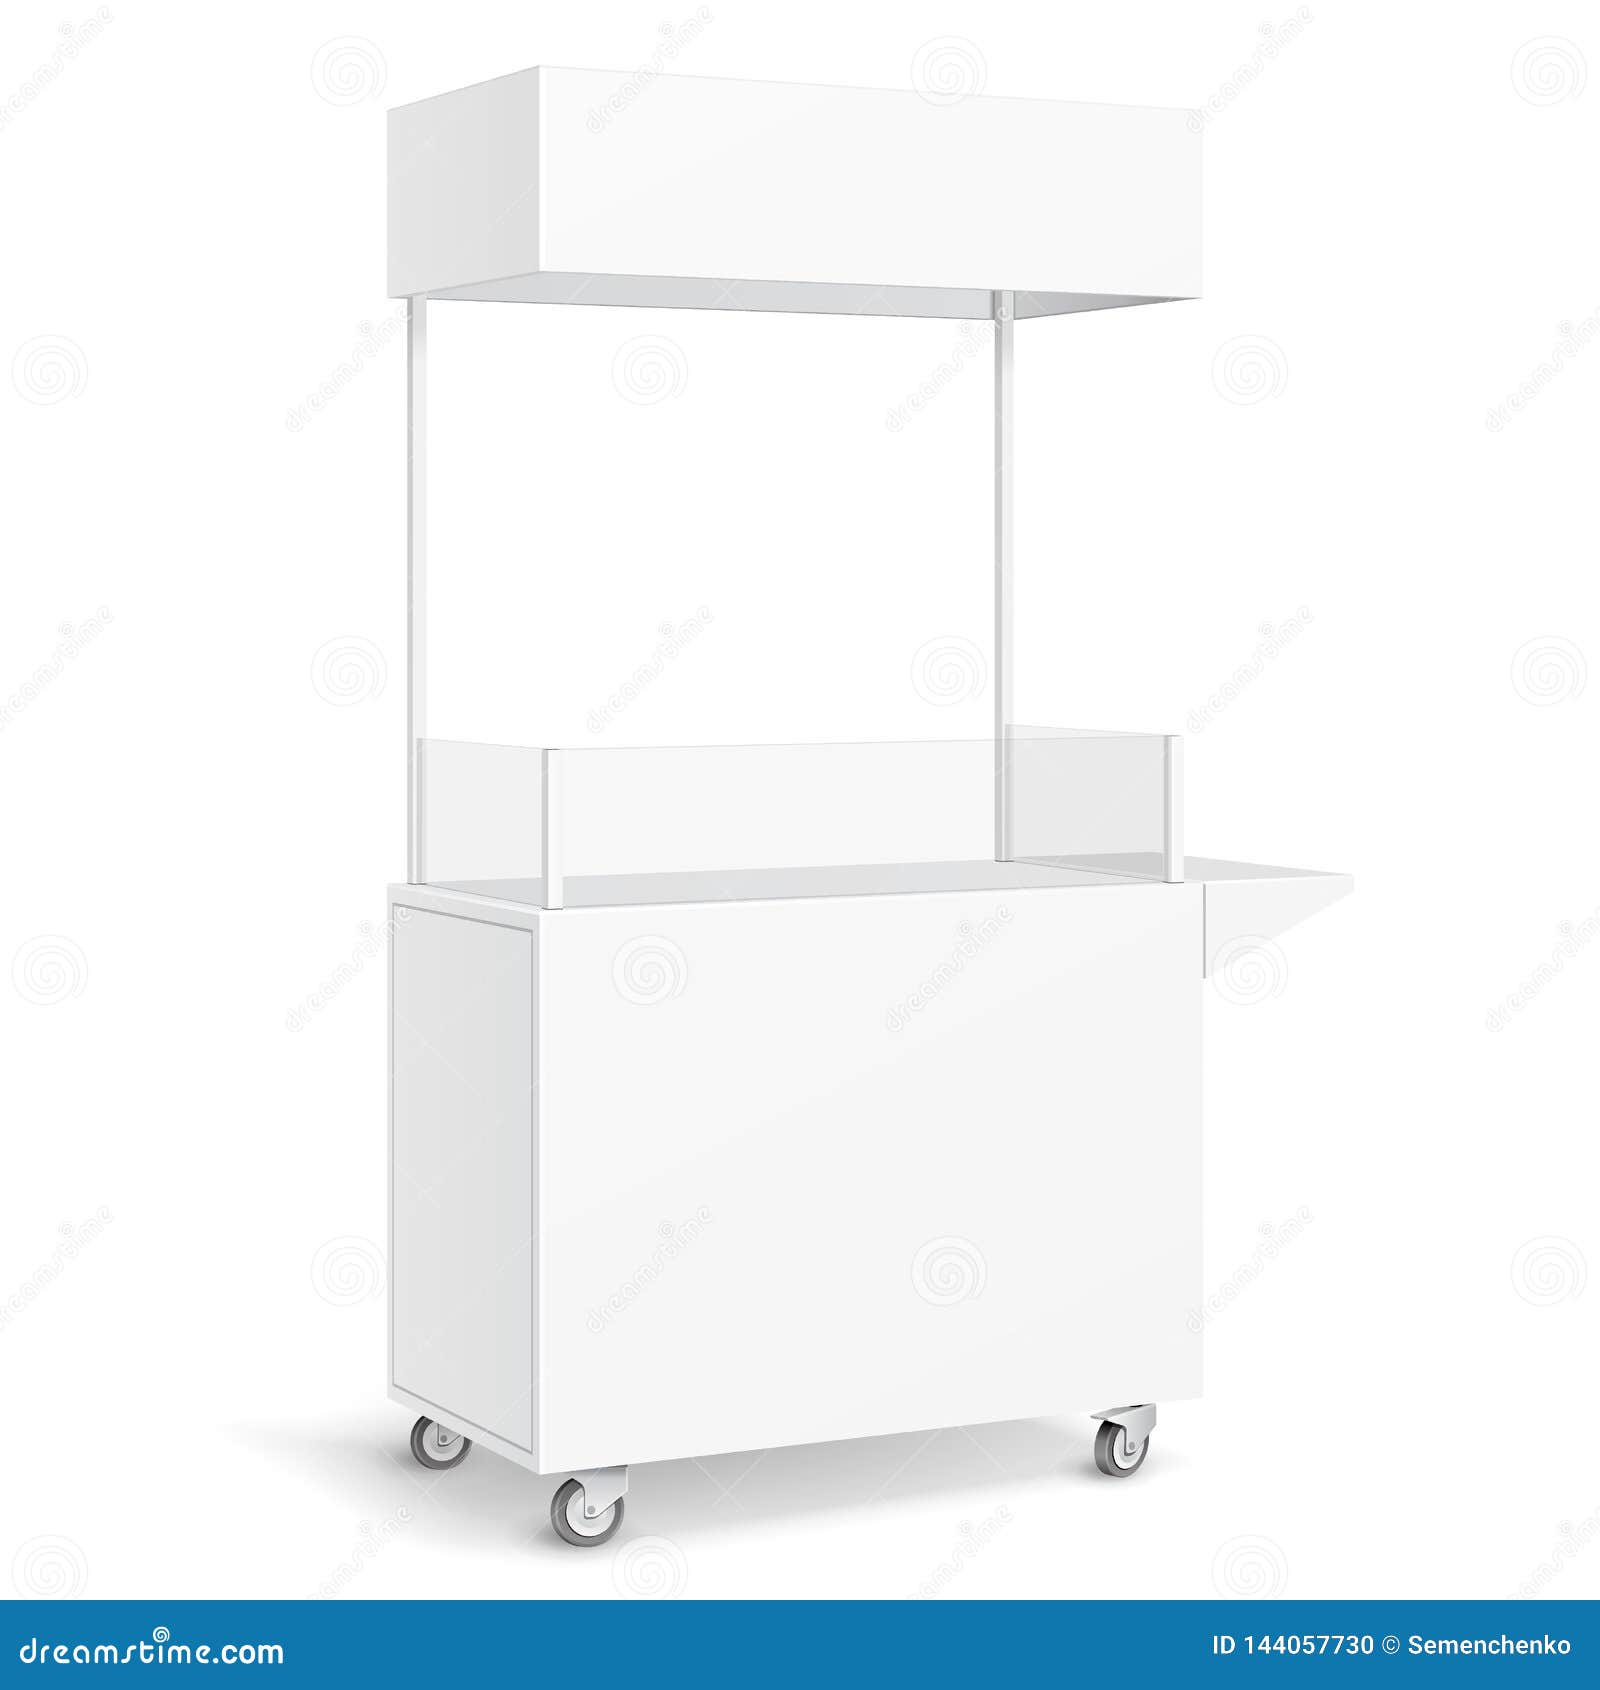 Download Mockup Mock Up White Pos Poi Blank Empty Retail Stand Stall Mobile Bar Display Canopy Banner Fast Food Isolated Stock Illustration Illustration Of Empty Mobile 144057730